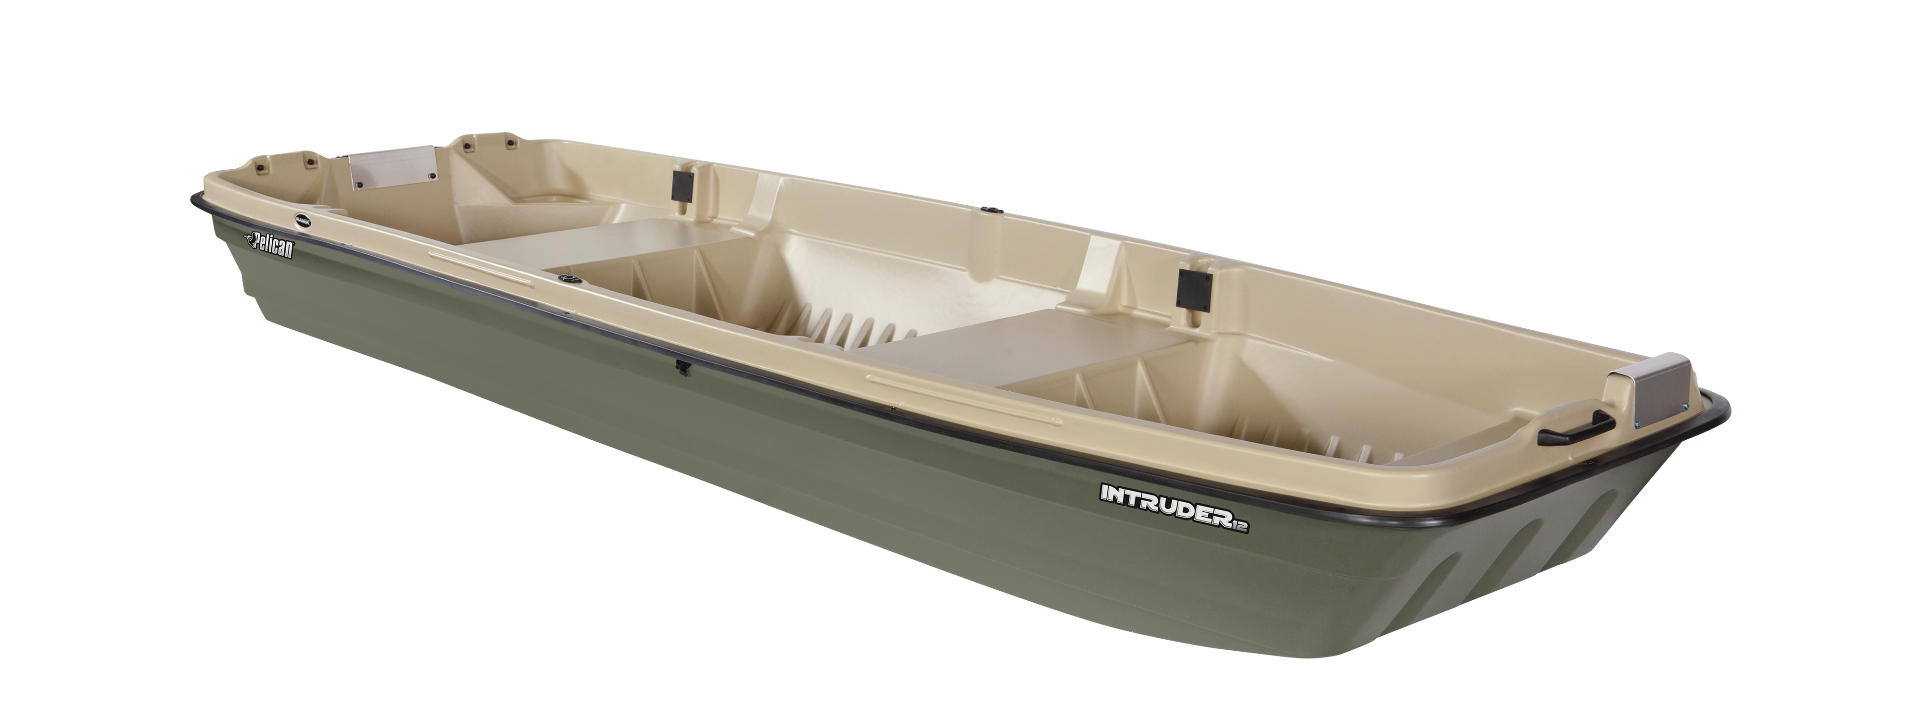 Pelican Boat Intruder 12 - Jon Fishing Boat - 12 ft - Great for Hunting and Fishing, Khaki/Beige - image 1 of 9